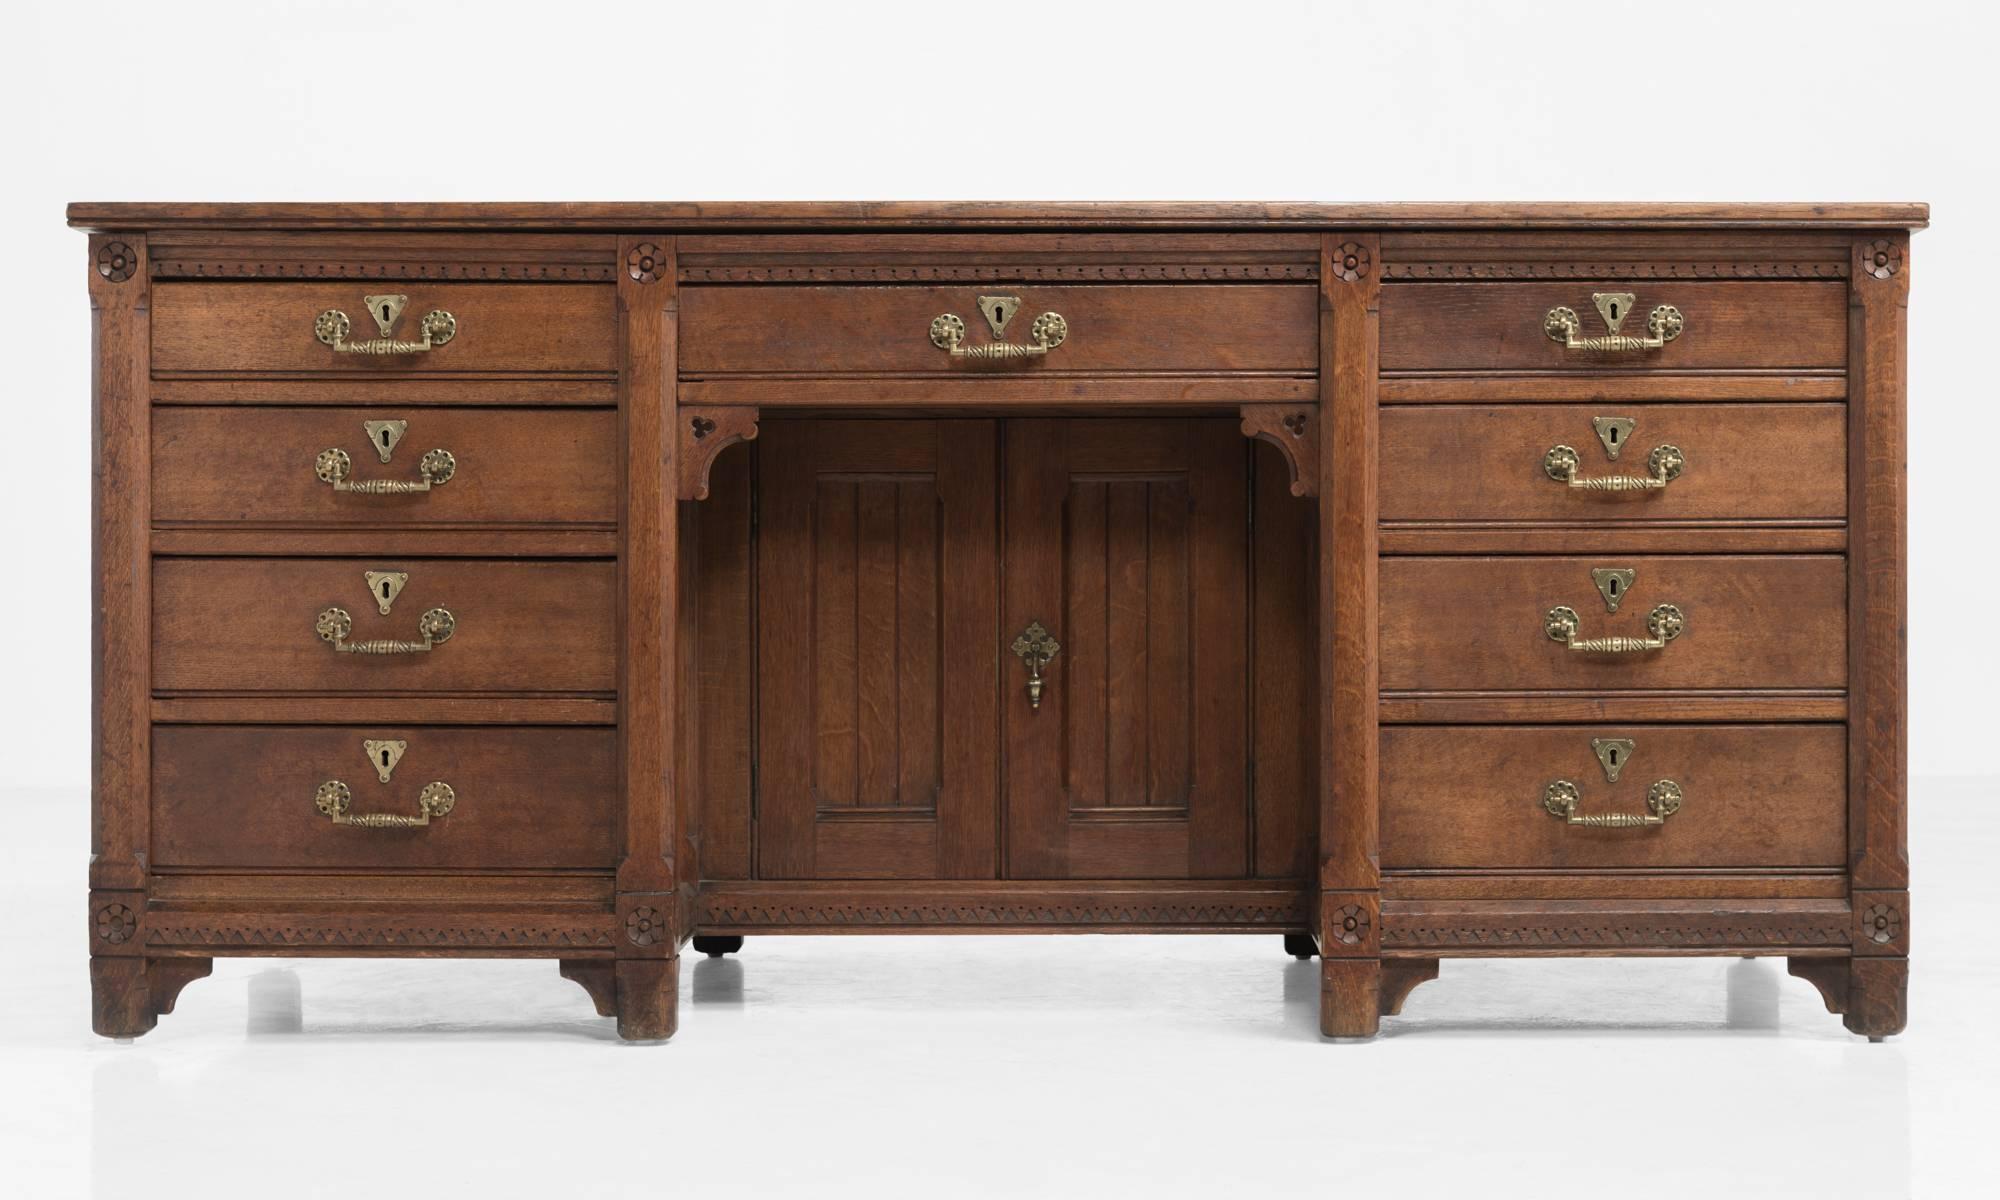 Handsome oak desk, England, circa 1870.

Sturdy construction with brass hardware and ornate detailing throughout. Made by Holland & Sons, London.